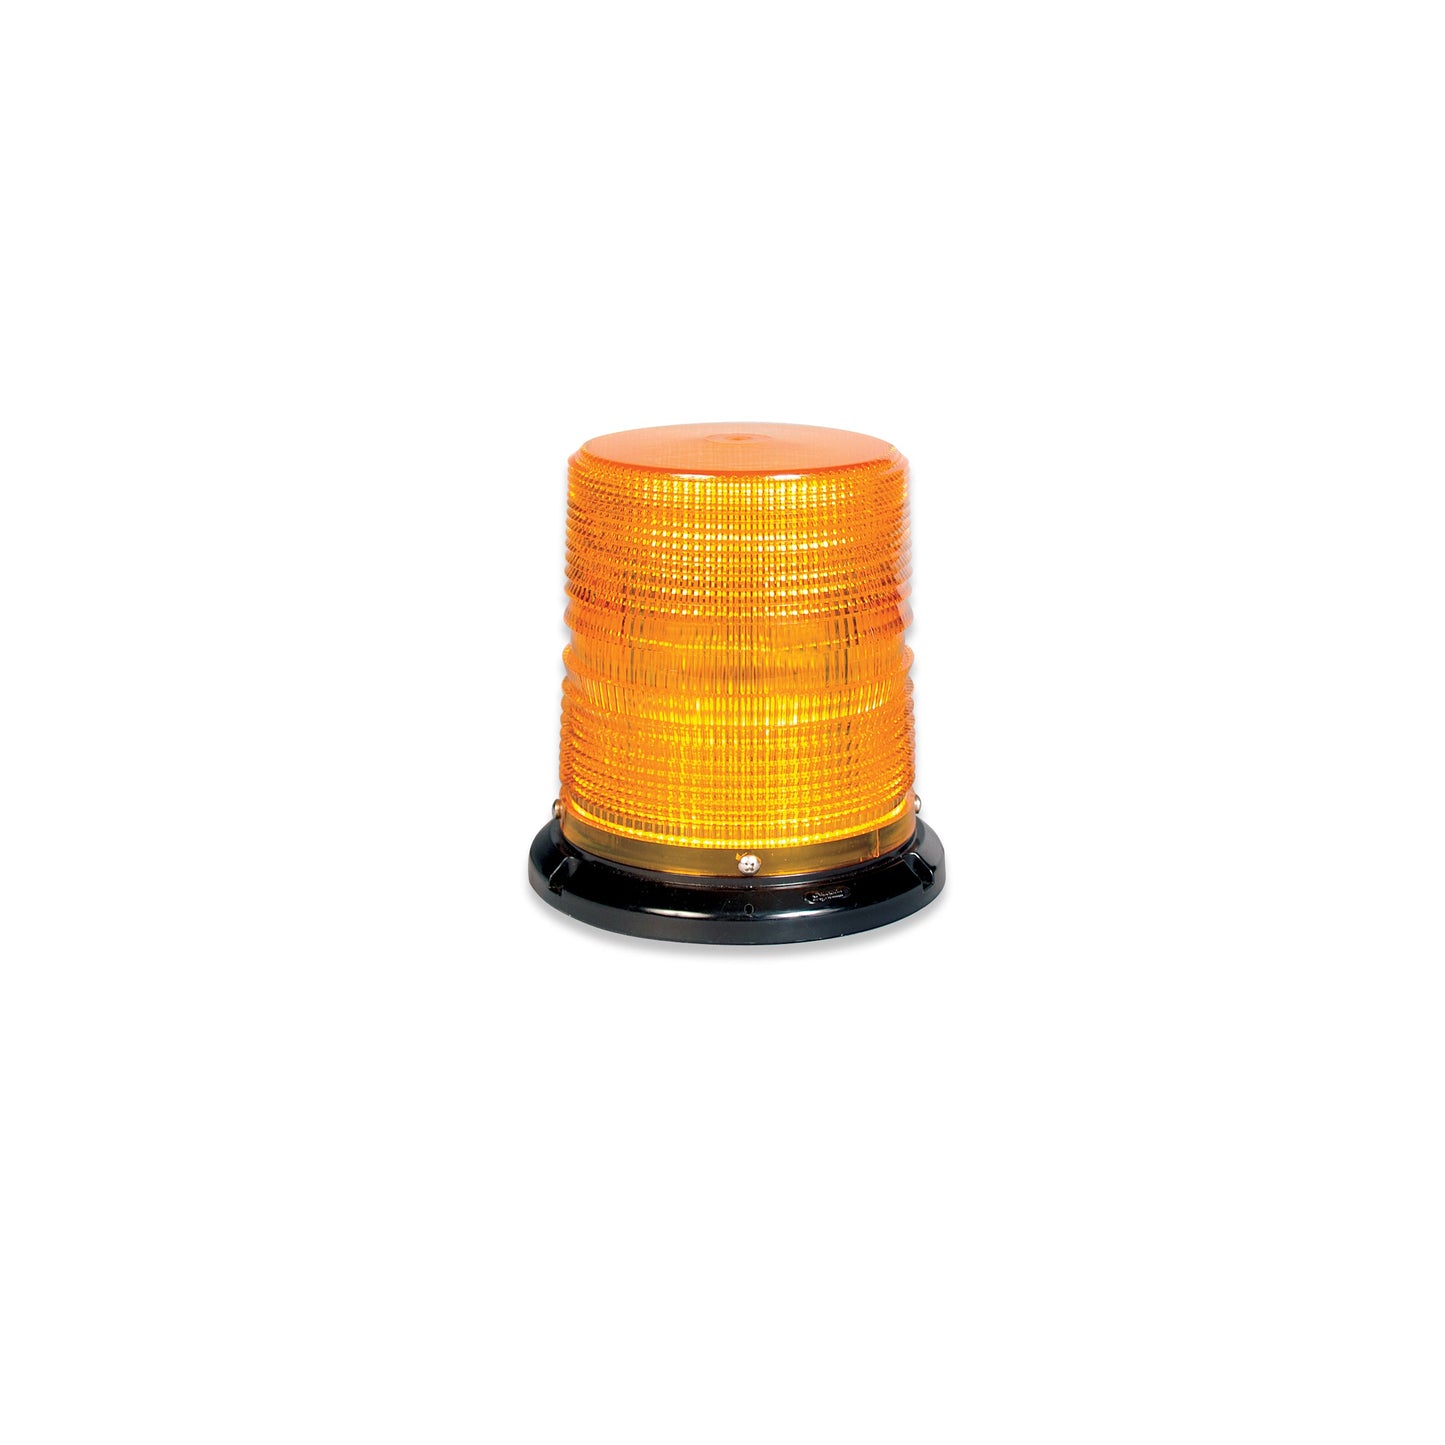 Soundoff Signal ELB42BCH0AC 4200 Series Led Beacon, 10-30V, Sae J845 Class 1 - Flat/Pipe Mount, 6" Clear Dome/ Amber Leds